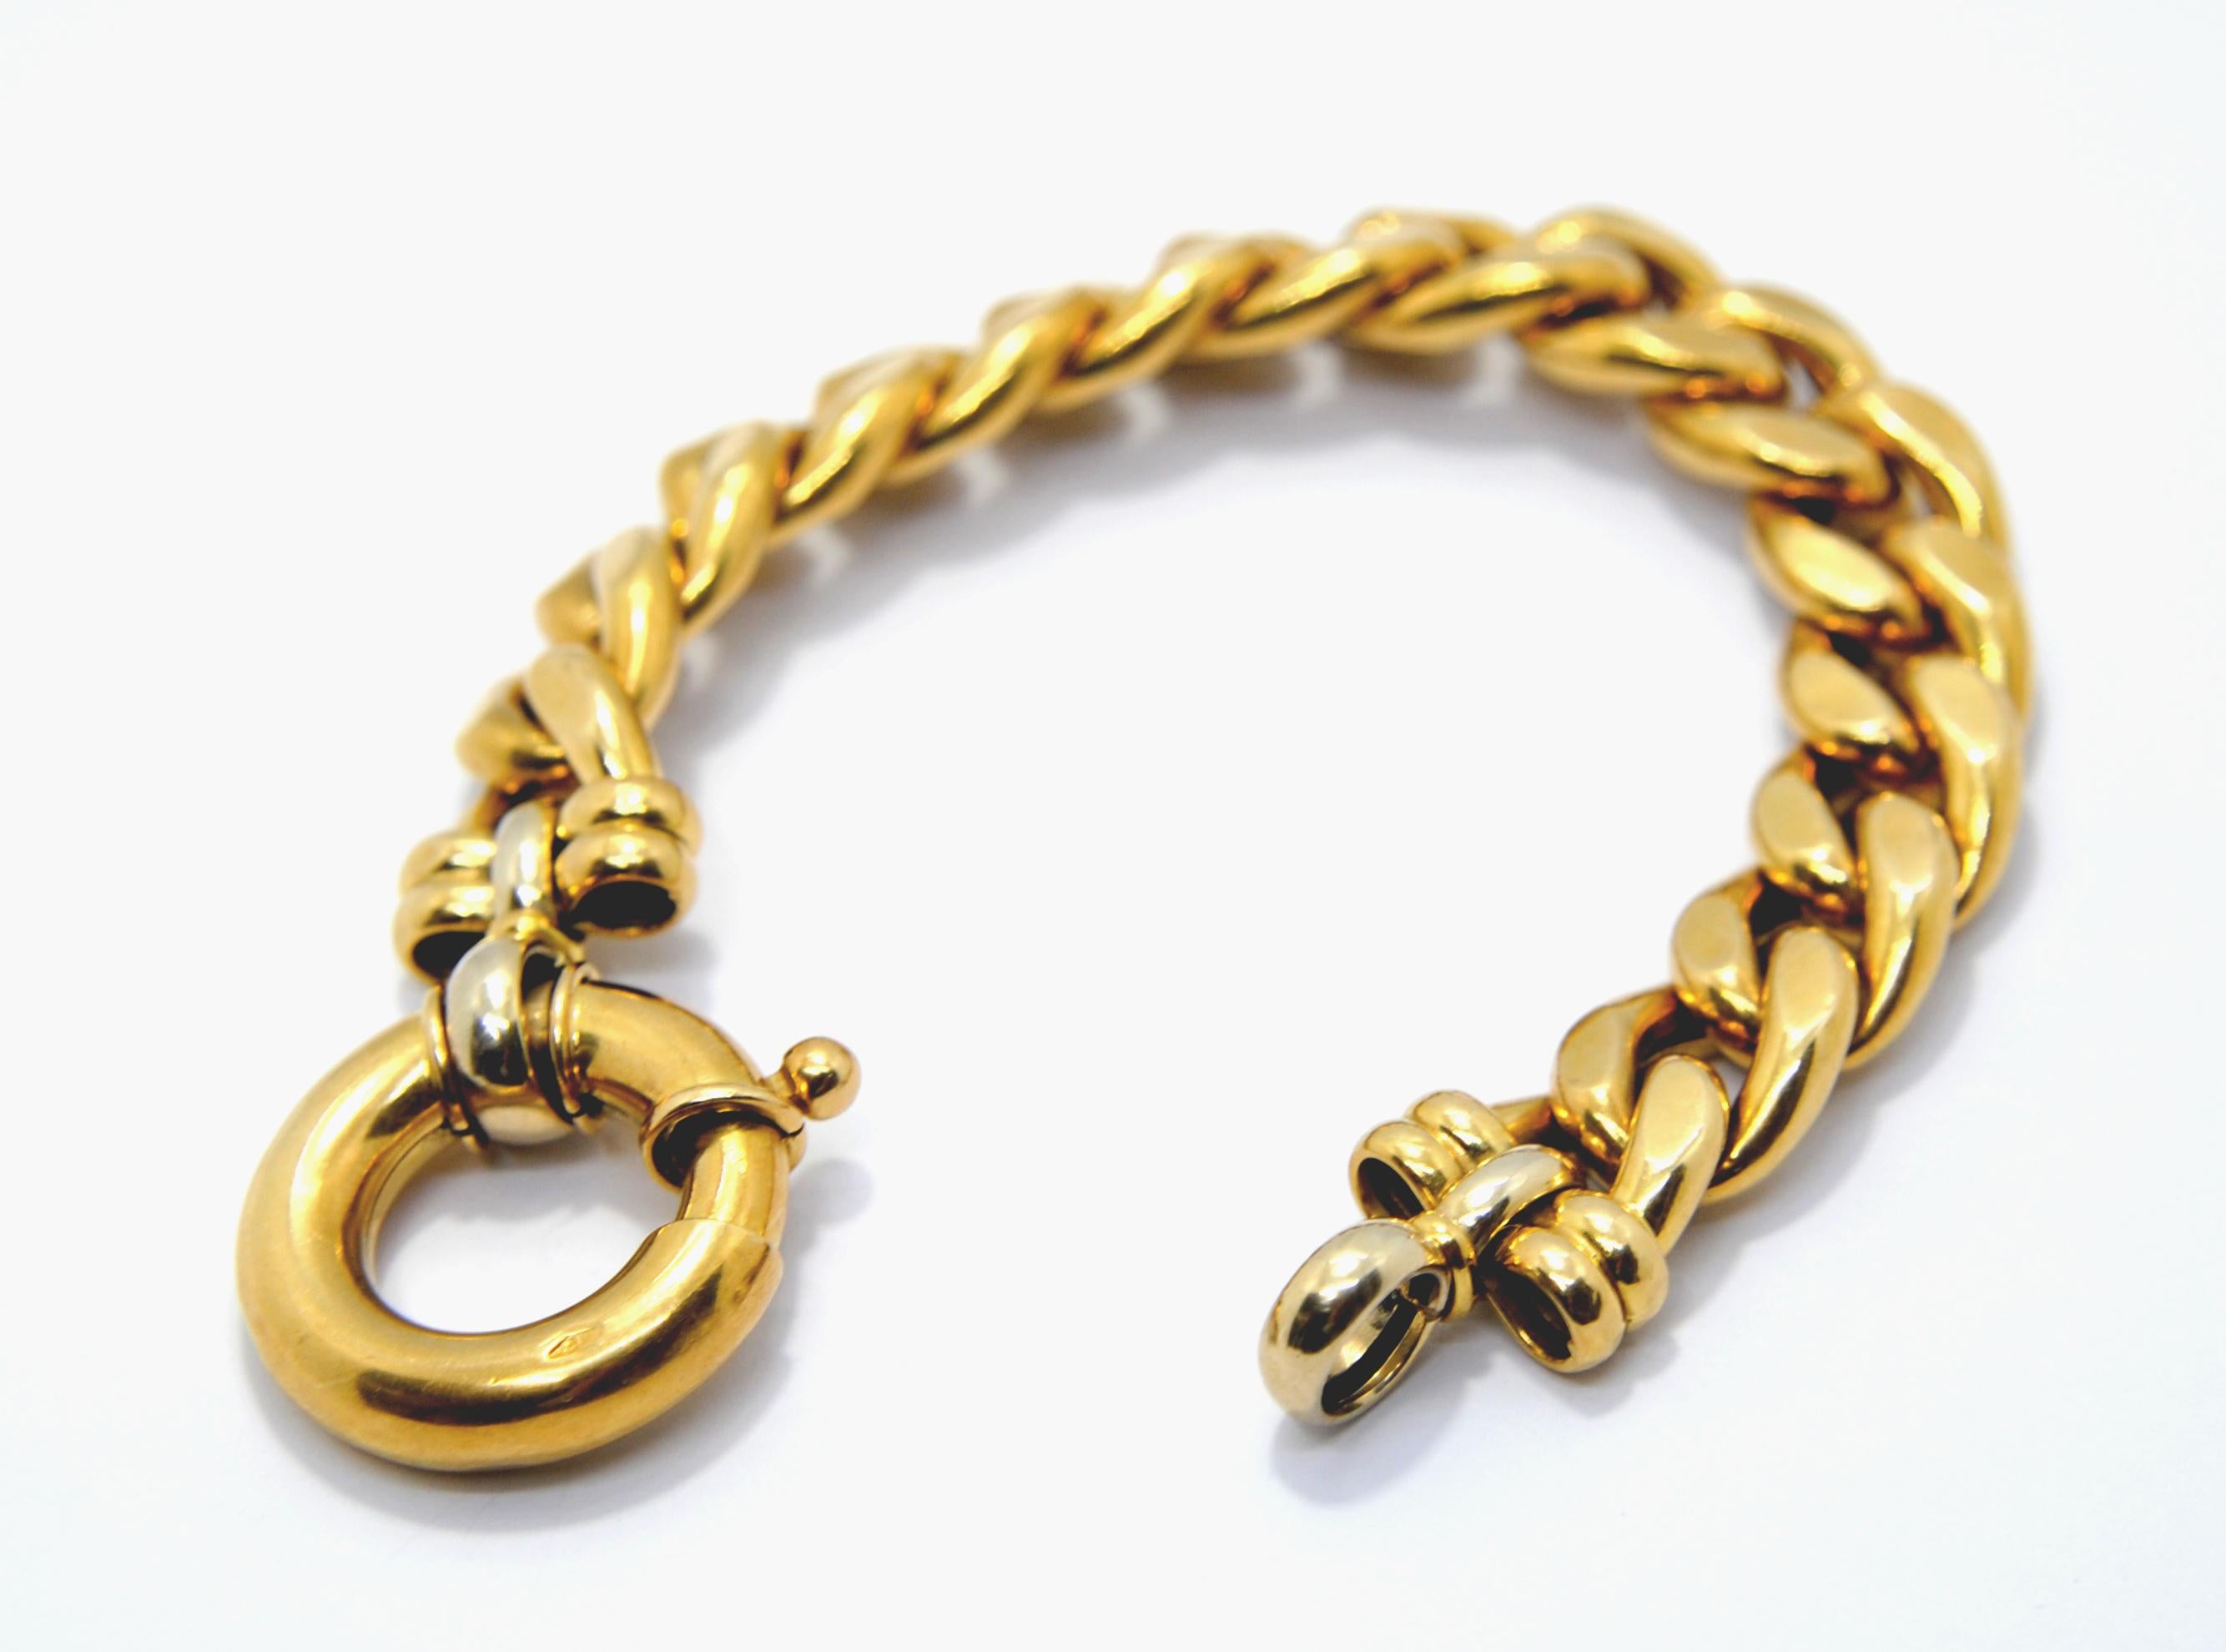 Classic 90´s big link bracelet
For creative and fashion every day wear and style can be adapted to another similar chain and can be used as necklace

Weight 34.7 grams
lenght 22 cm